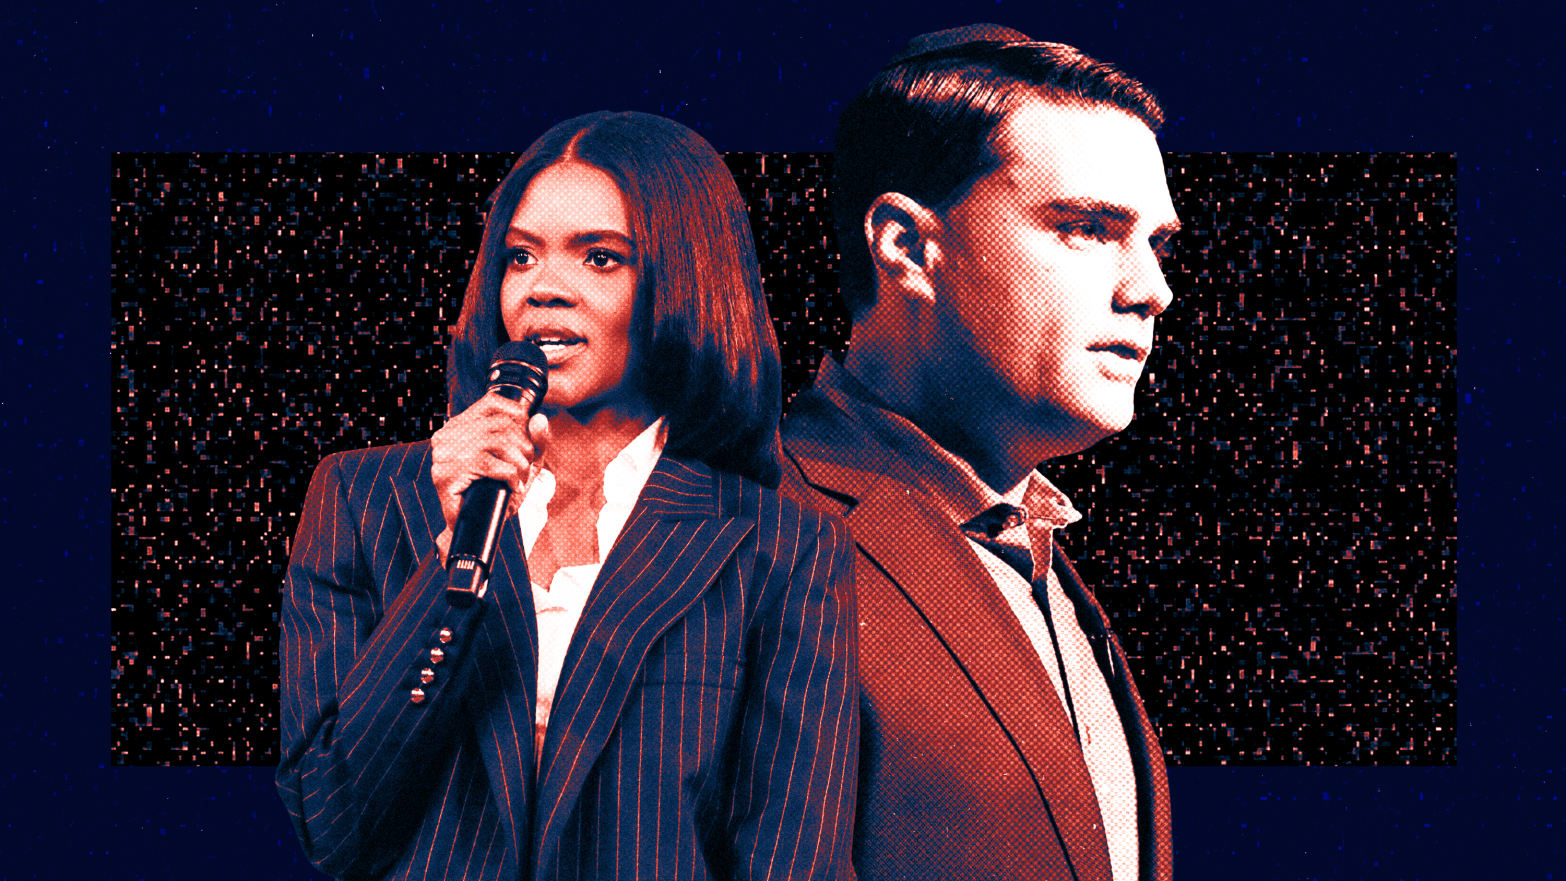 A photo illustration of Candace Owens and Ben Shapiro.